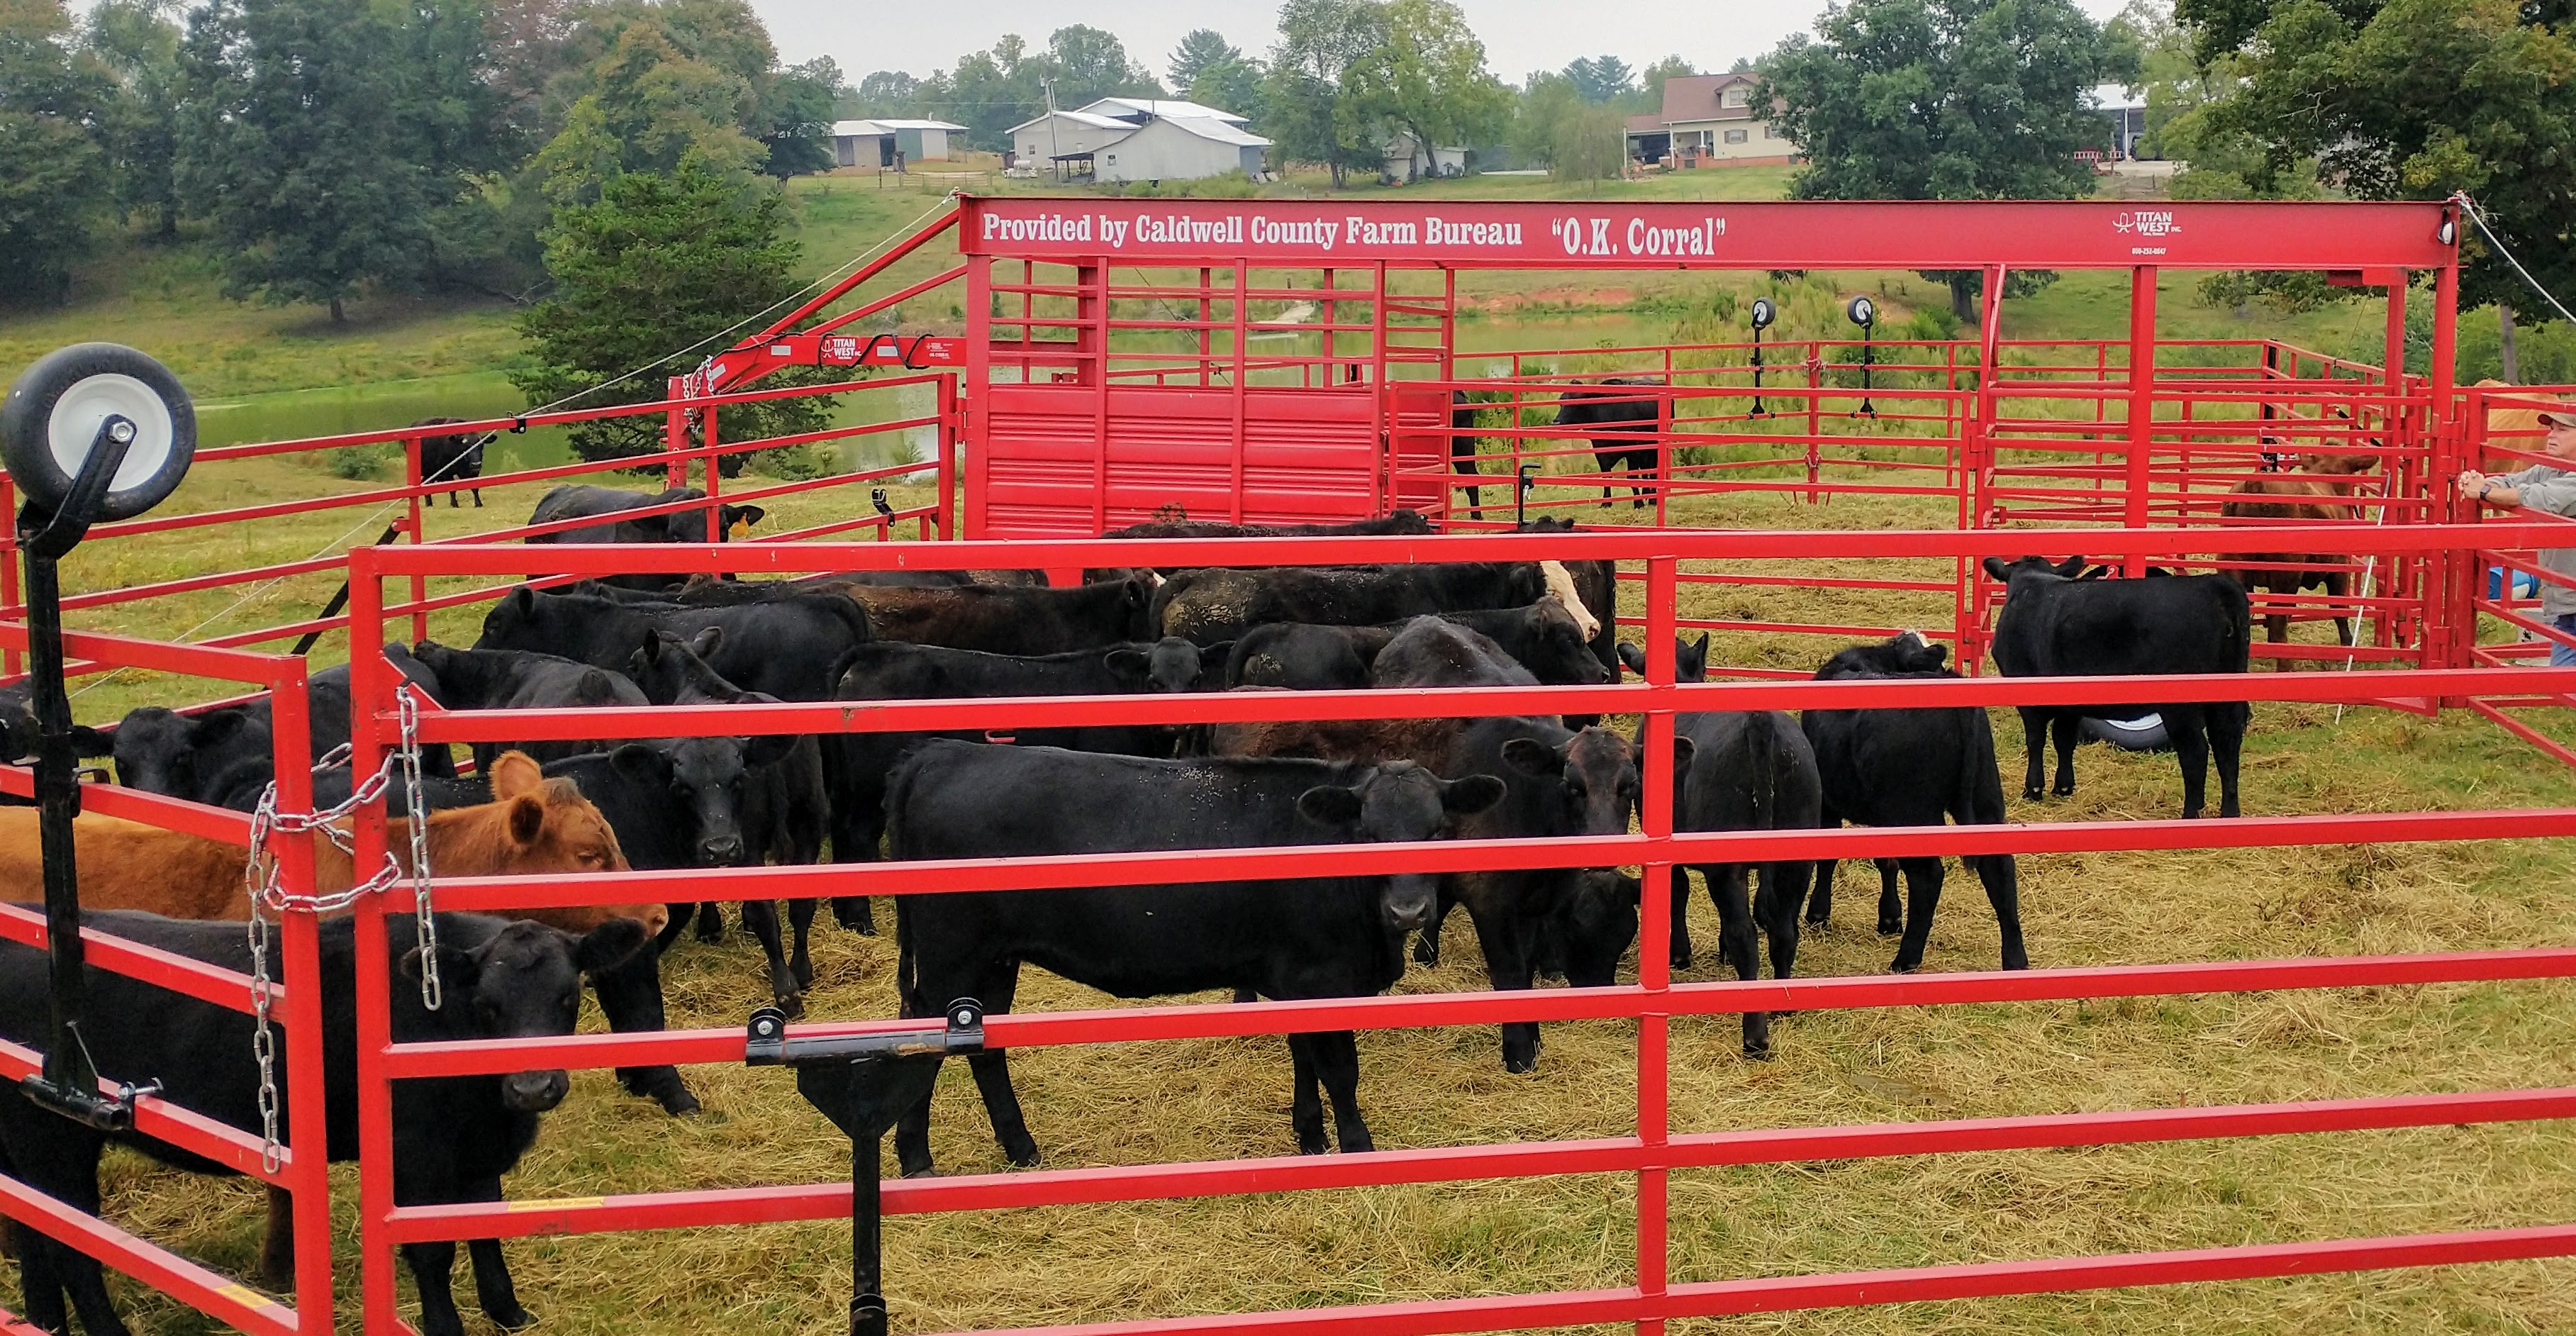 Yearling cattle waiting in the corral to be loaded. (credit: Seth Nagy)